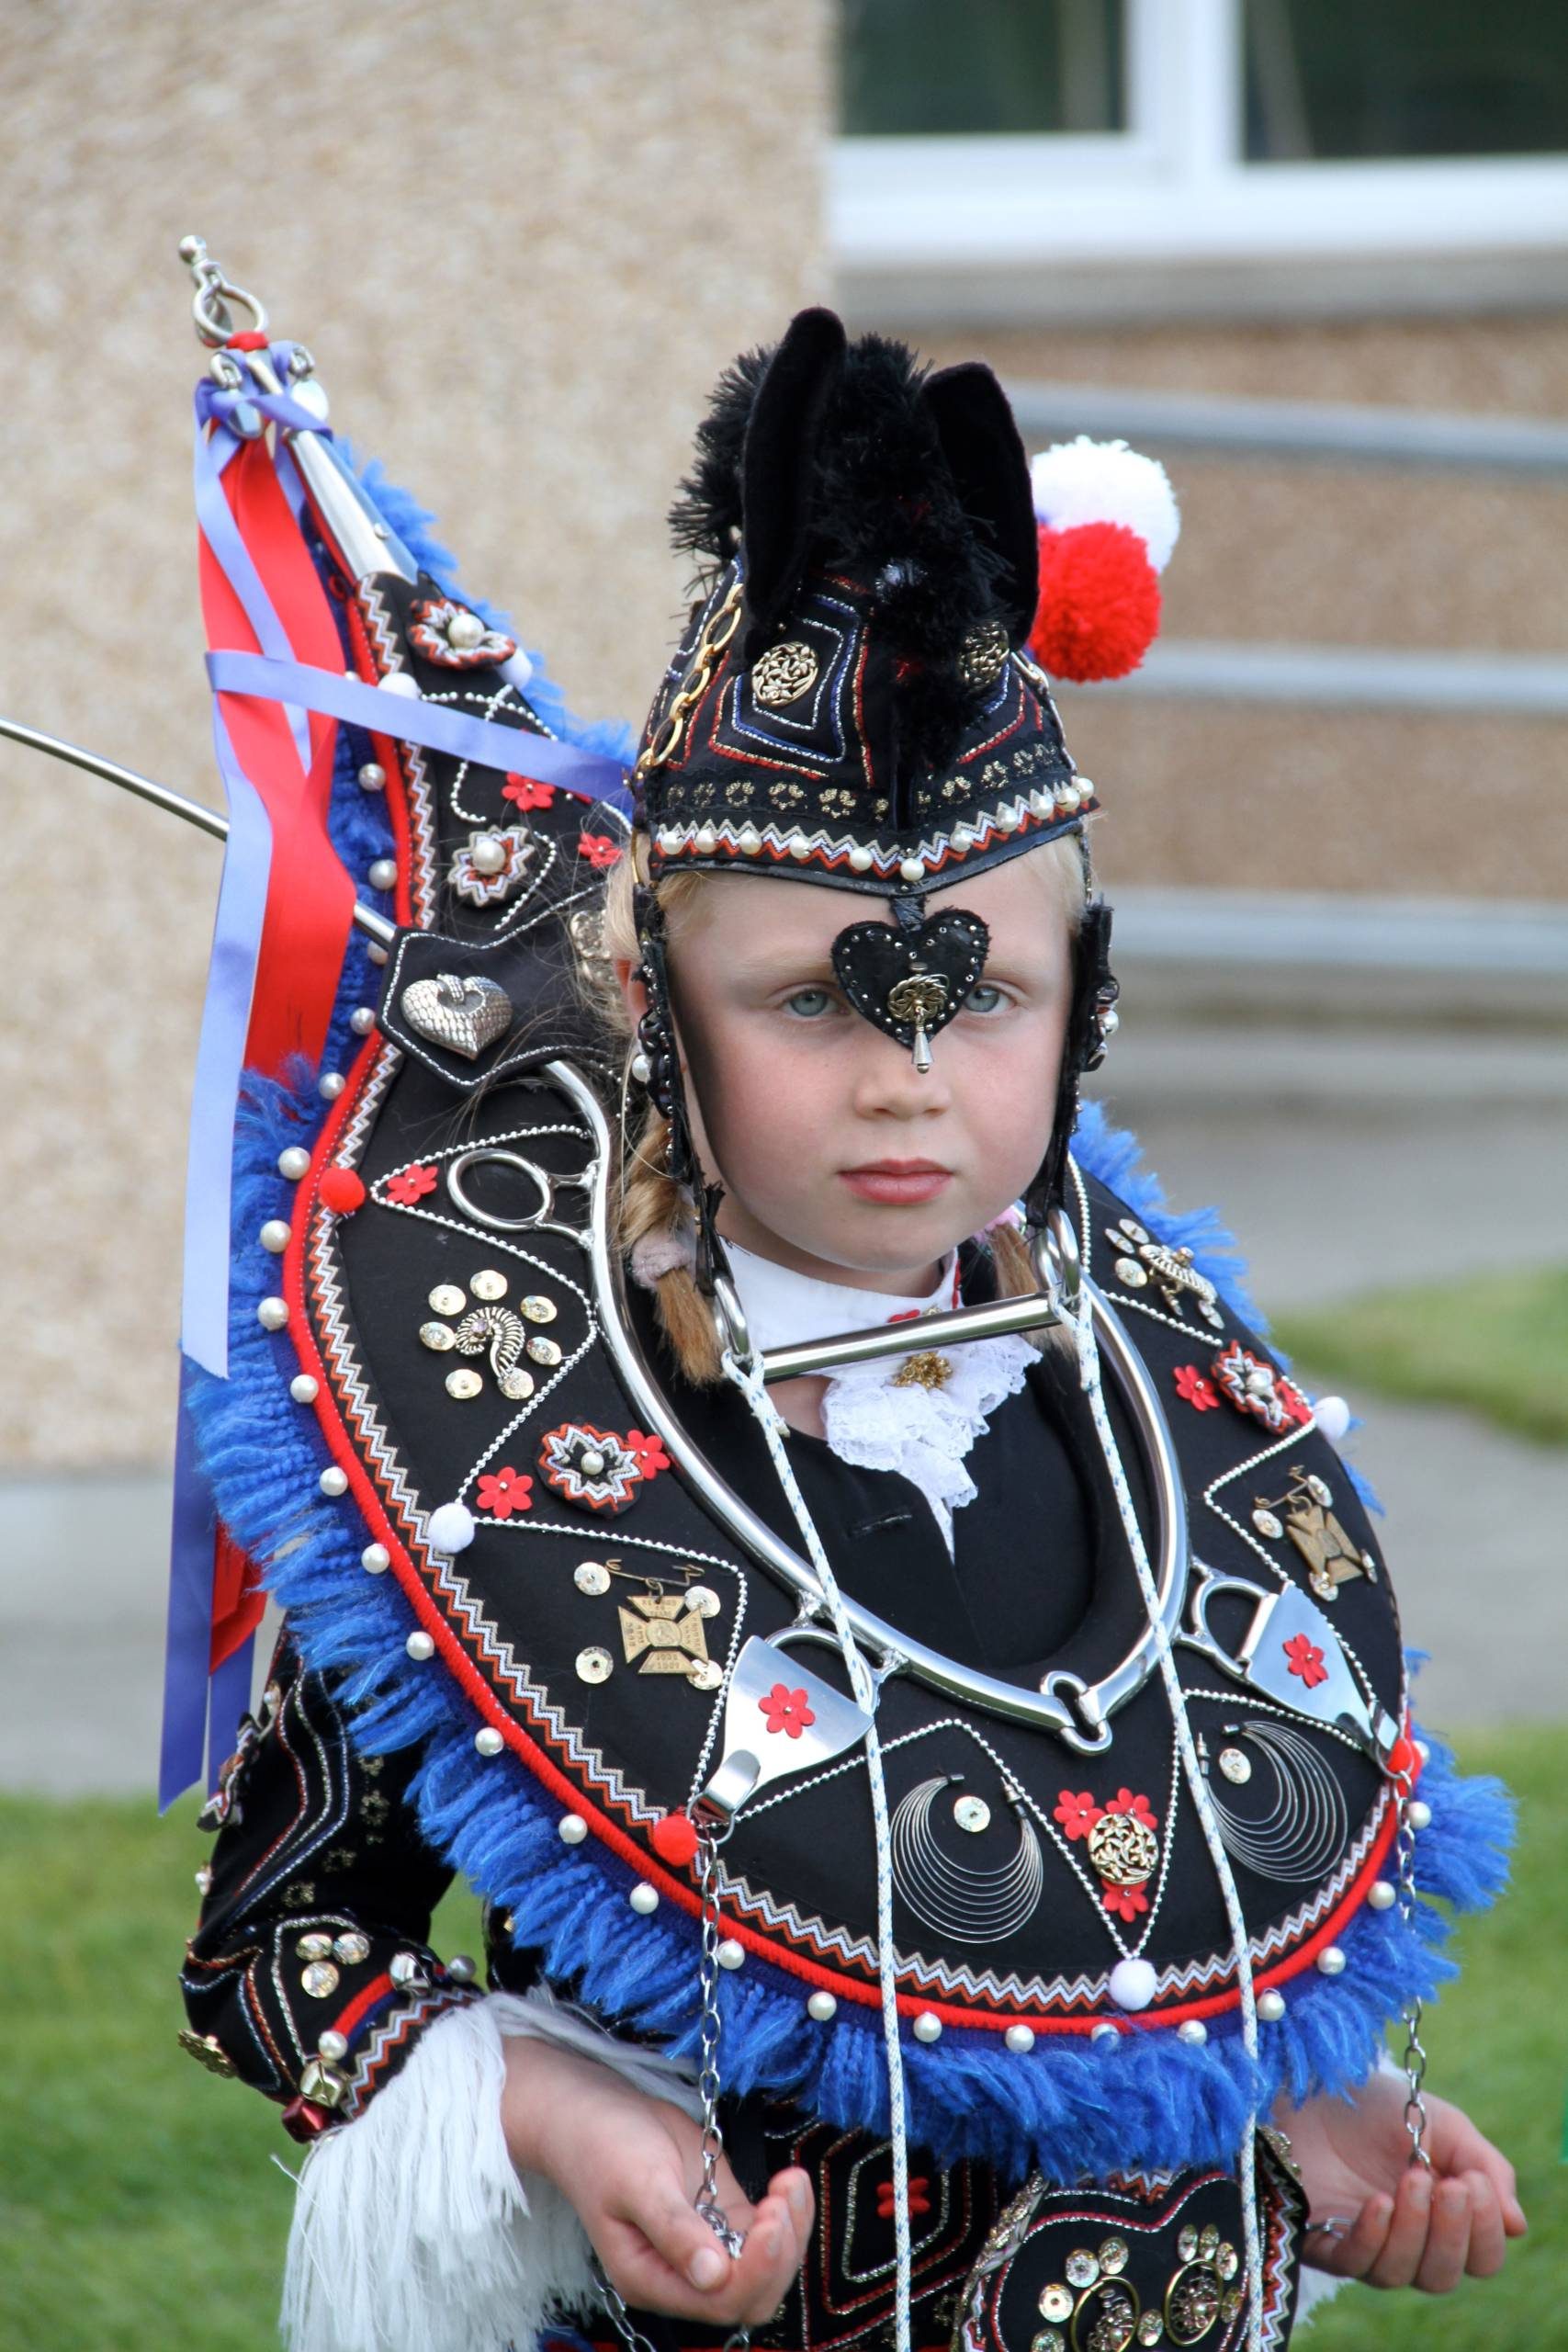 A young girl dressed in an elaborate and heavily embellished traditional cultural costume, carrying a ceremonial staff or flag, posing outdoors against a building backdrop.